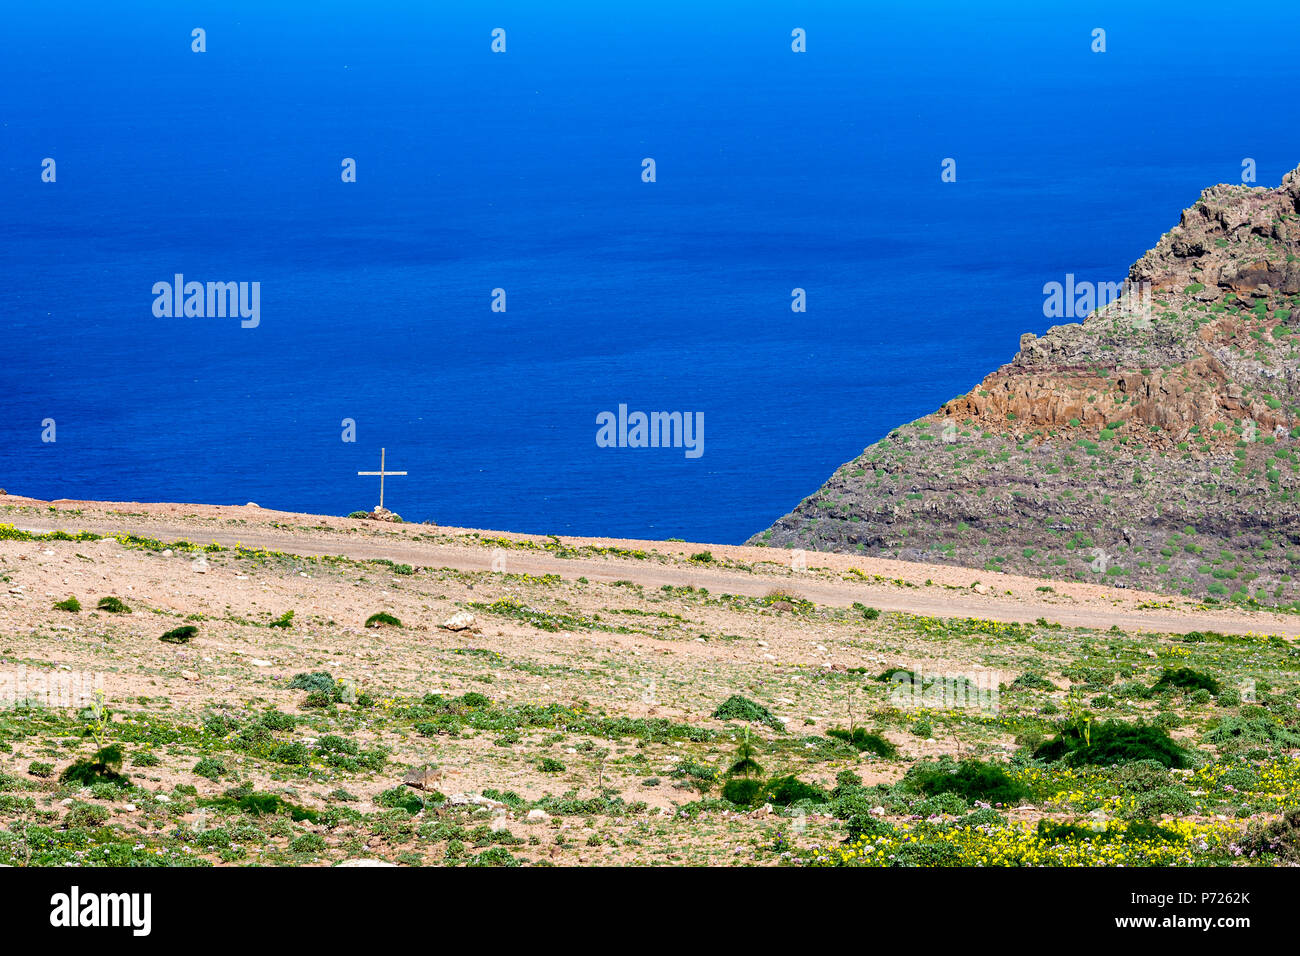 Lanzarote, Canary Islands, Spain, elevated landscape view of the blue Atlantic Ocean with Christian cross on a tomb near a dirt road close to the shore Stock Photo